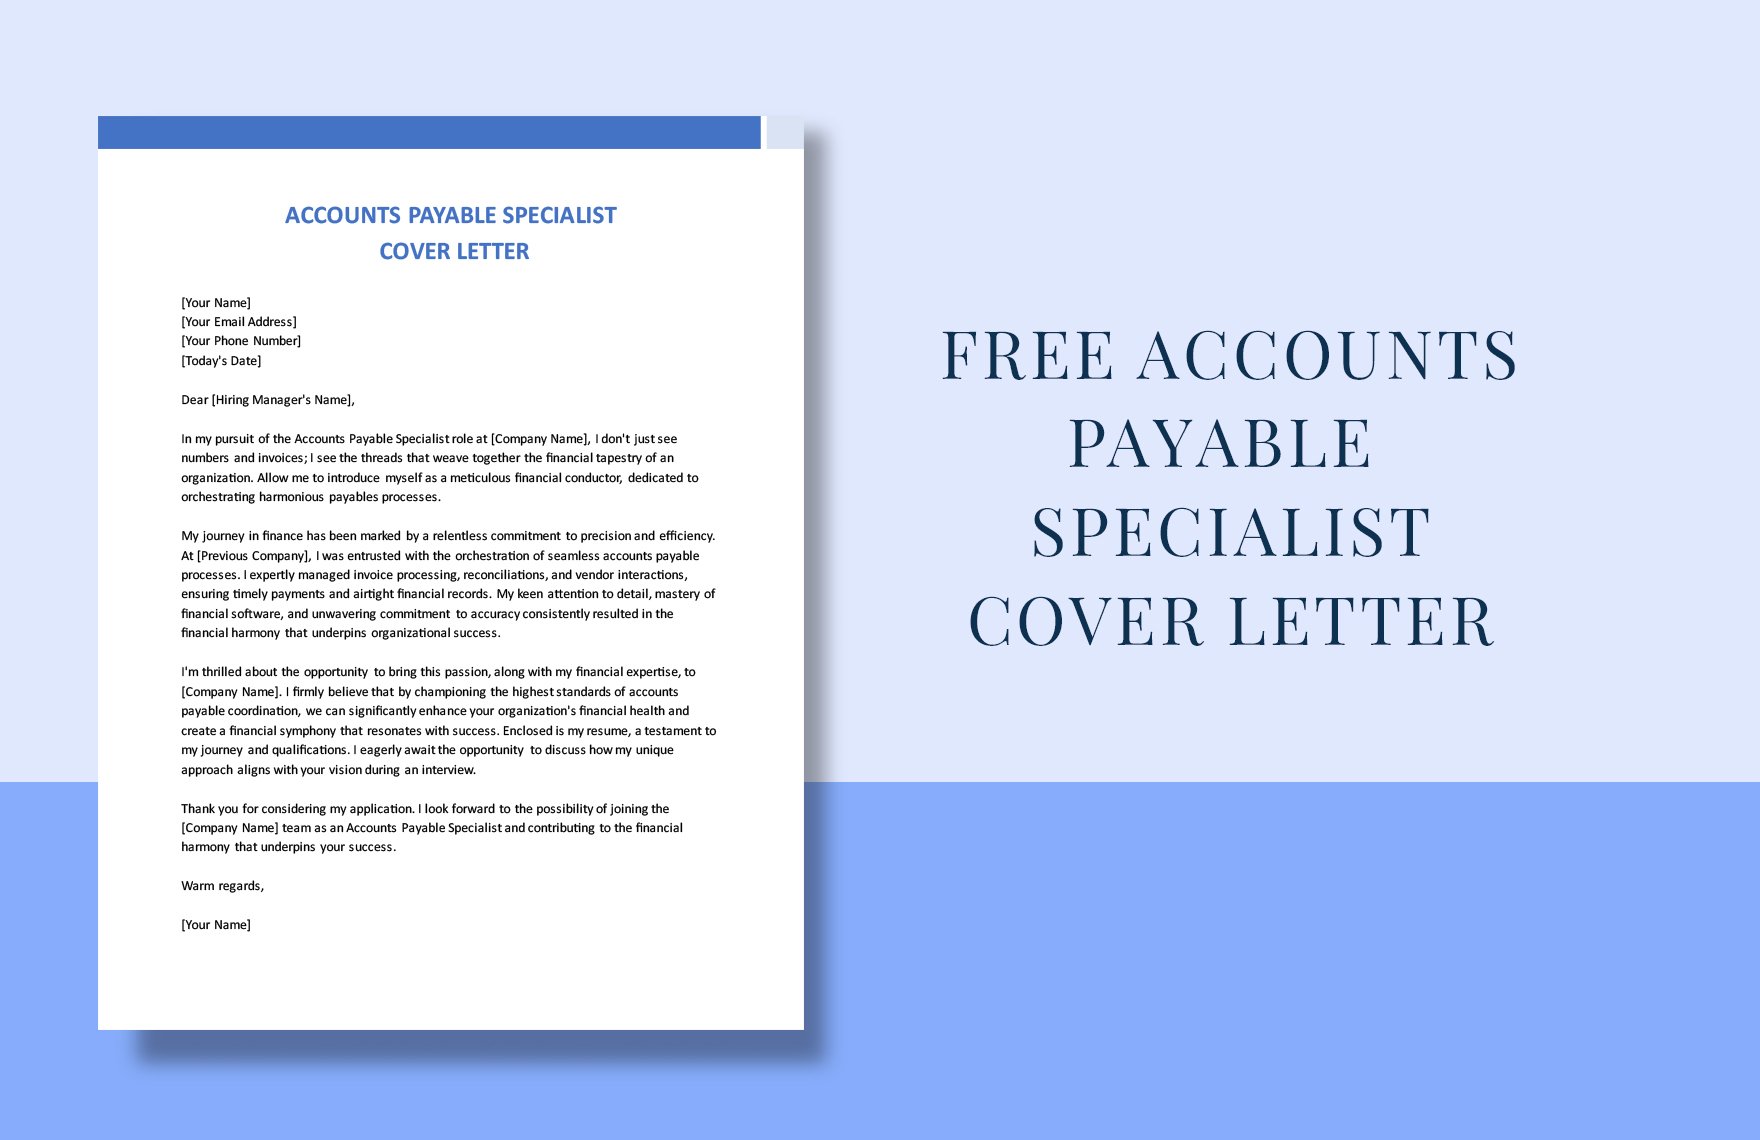 Accounts Payable Specialist Cover Letter